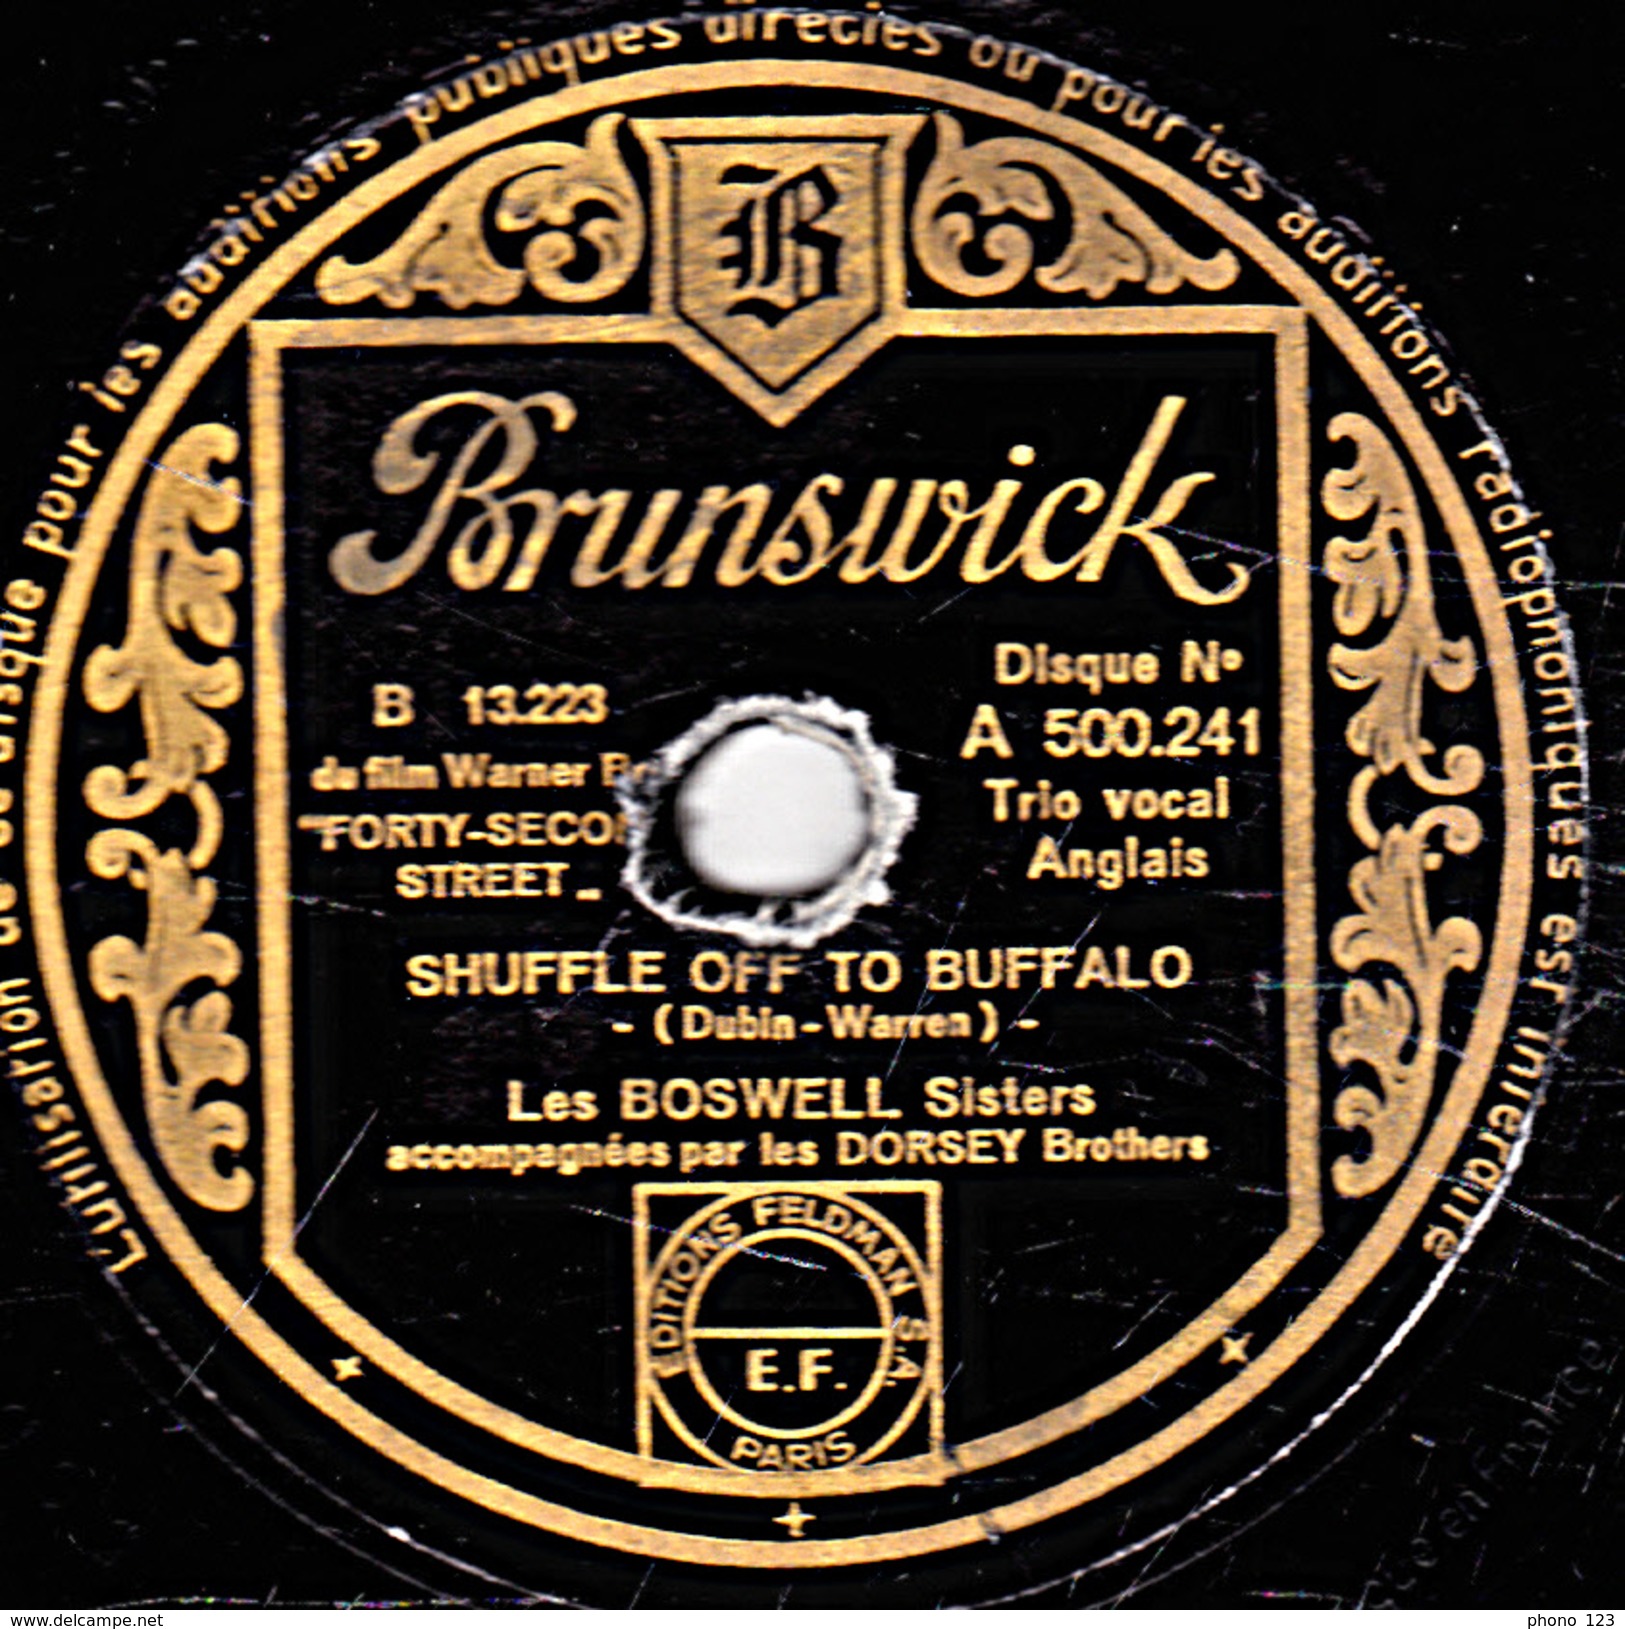 78 T - 25 Cm. - état B - Les BOSWELL Sisters - FORTY SECOND STREET - SHUFFLE OFF TO BUFFALO - 78 T - Disques Pour Gramophone